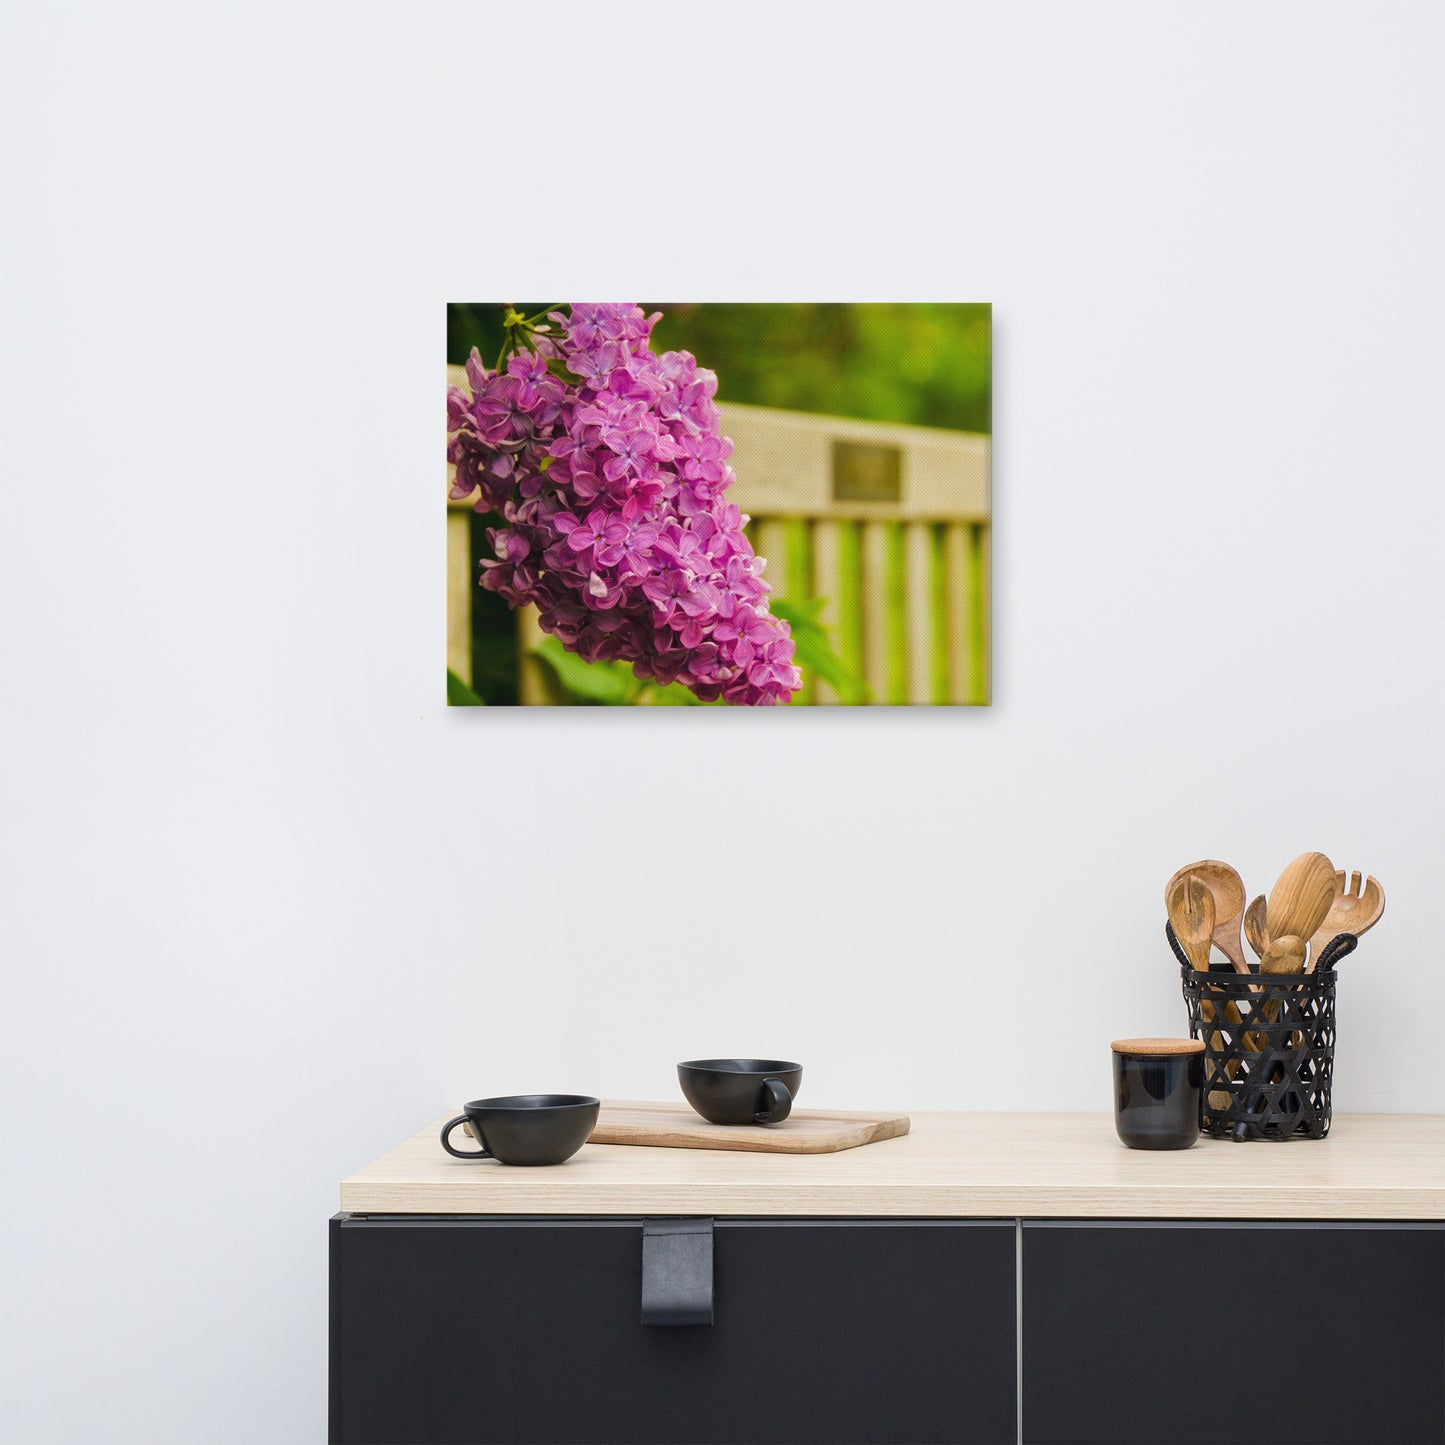 Park Bench with Lilac Floral Botanical Nature Photo Canvas Wall Art Prints